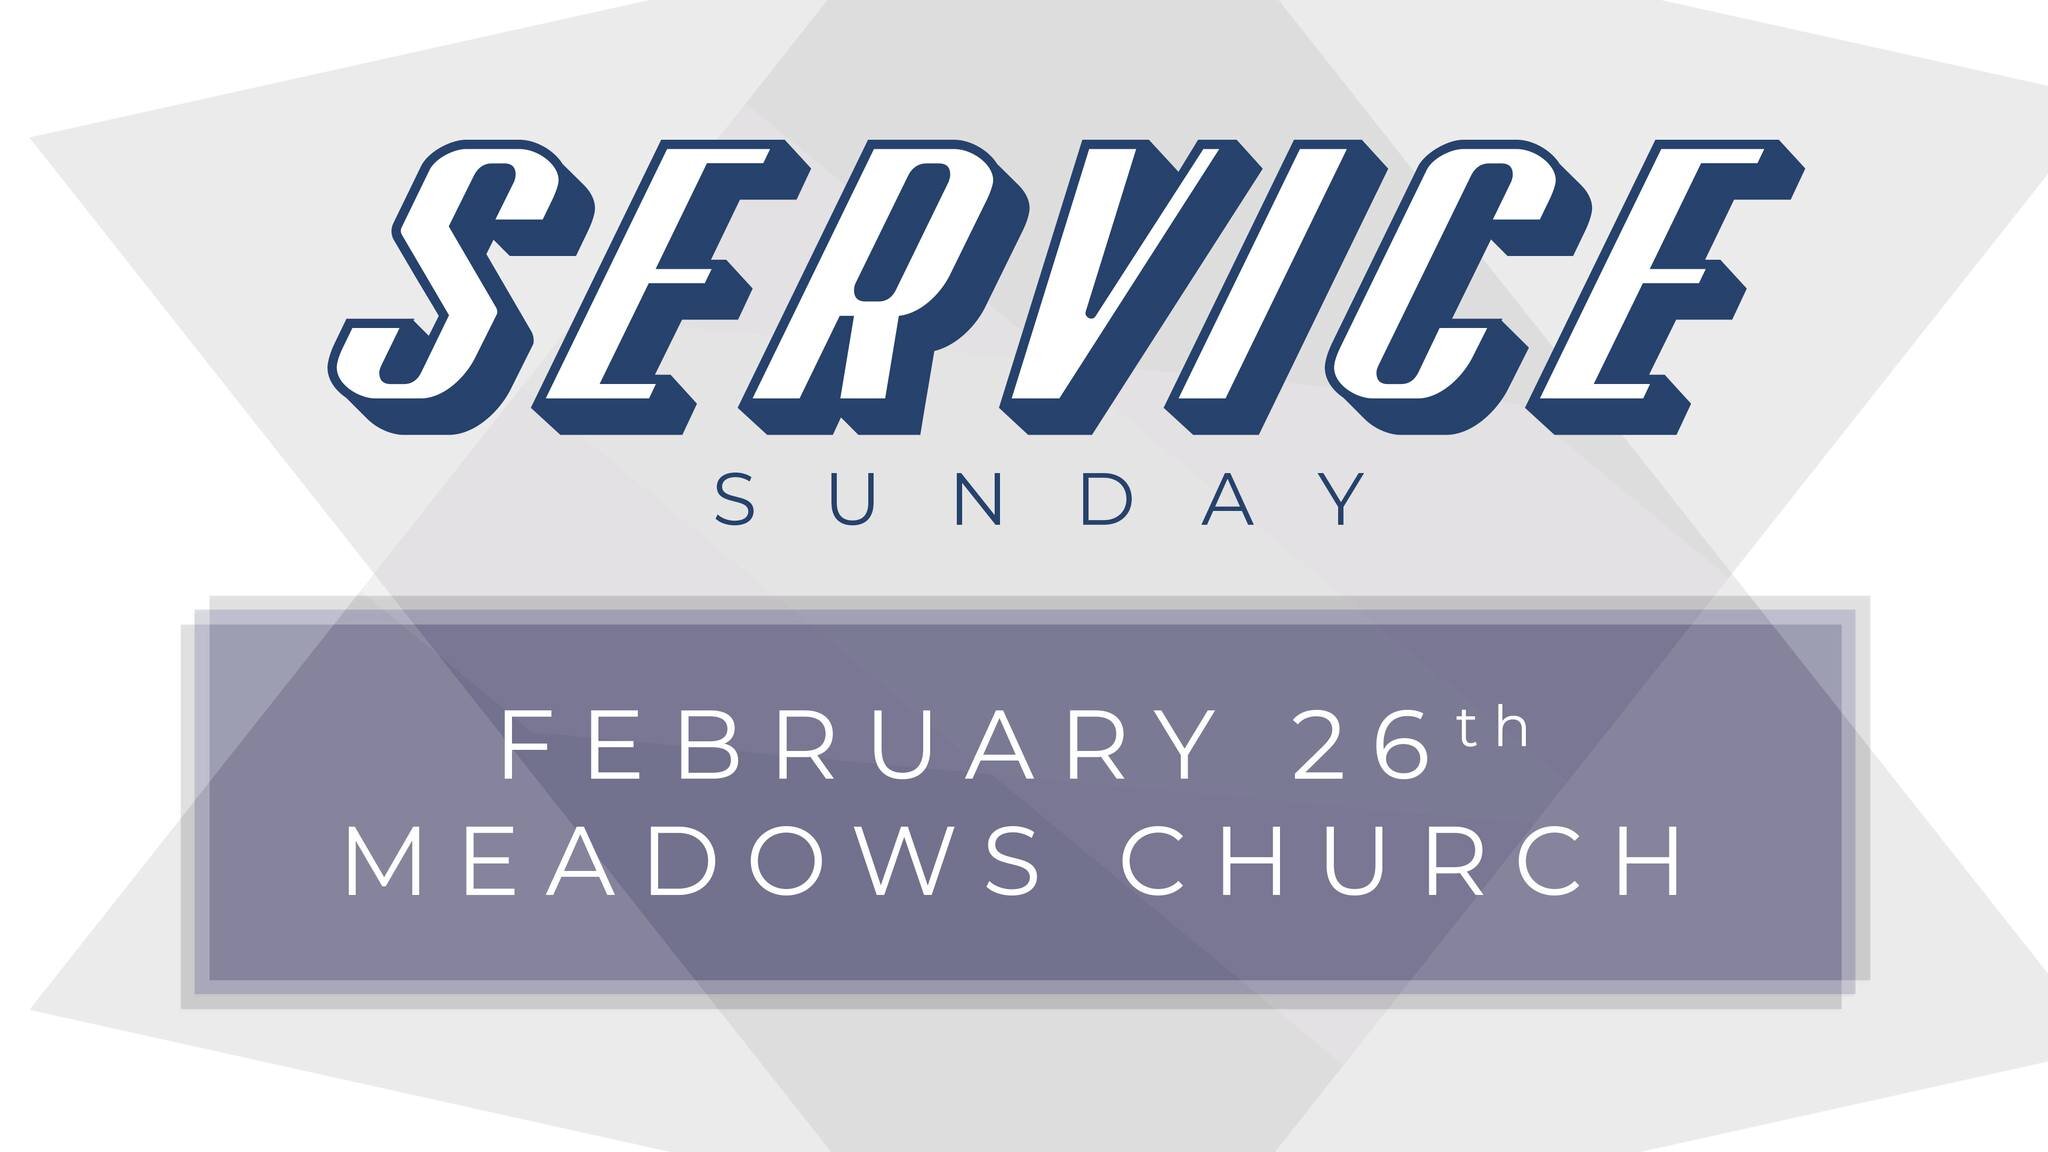 February 26th we WILL NOT be meeting in our building! Instead, we will be joining Meadows Church at the AMC movie theatre to serve alongside them and worship as one body. We are so excited to have the opportunity to love our brothers and sisters in C